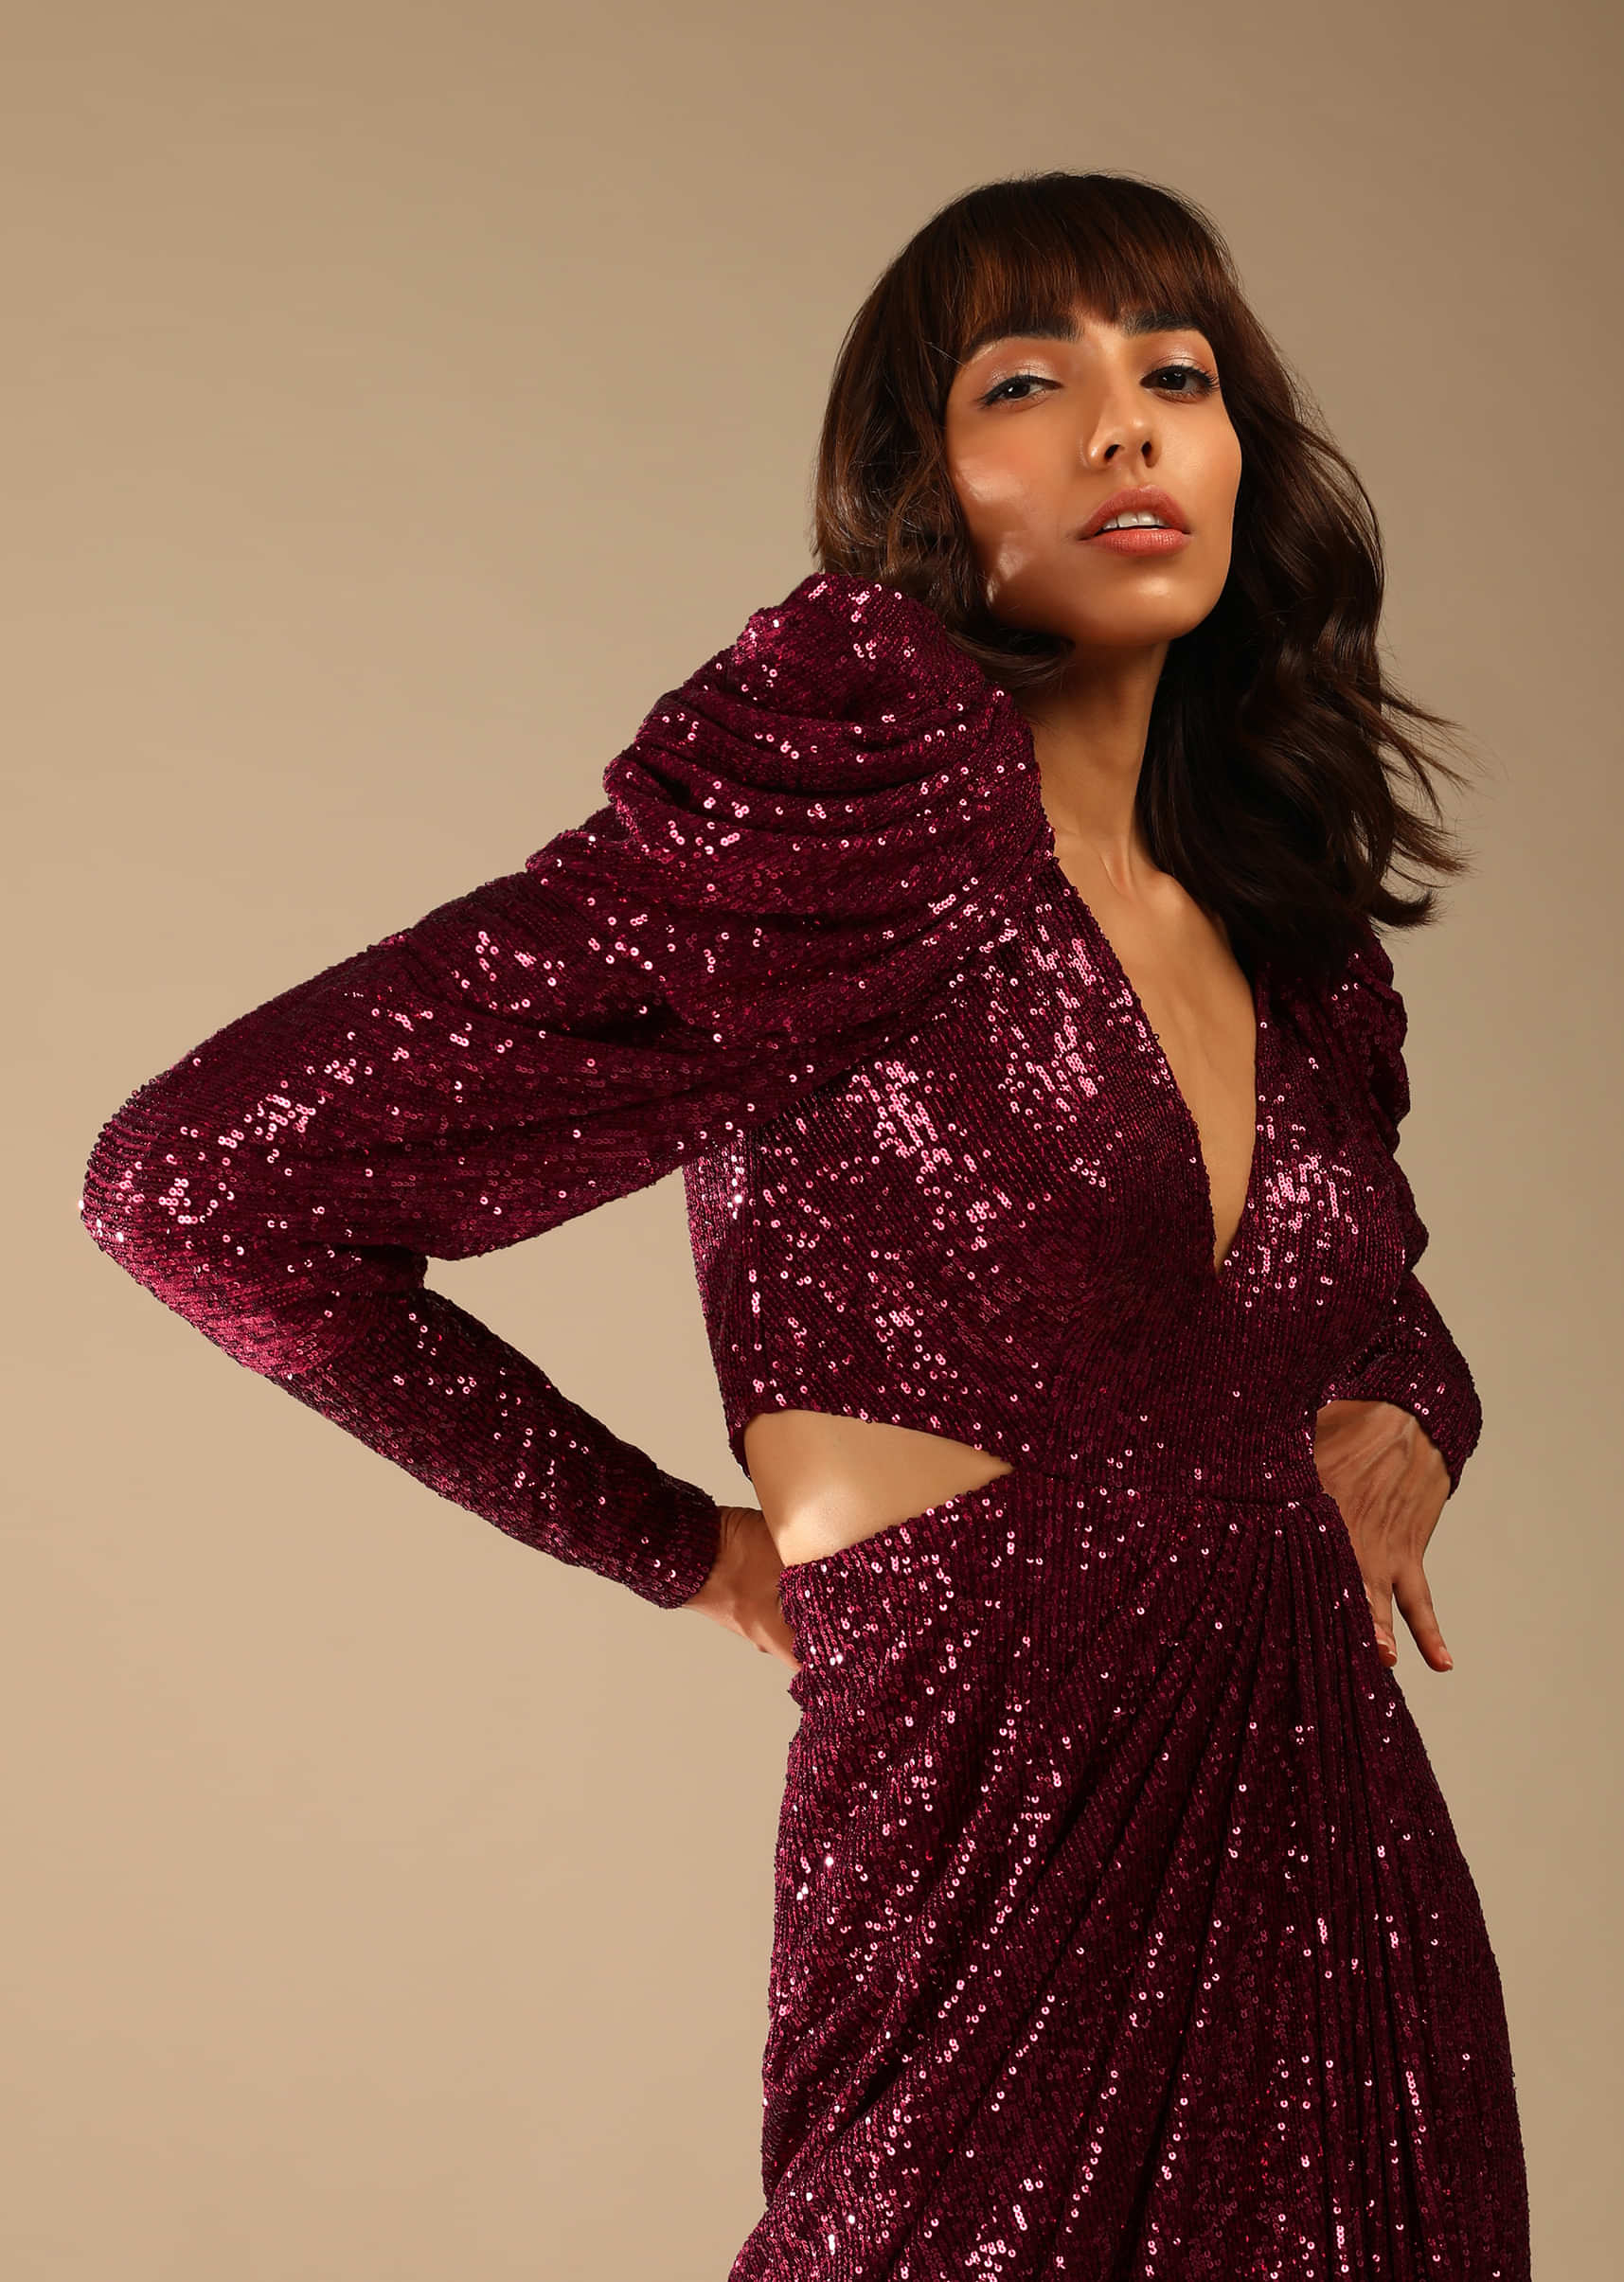 Burgundy Red Gown Embellished In Sequins With Elaborate Puffed Shoulders And Plunging Neckline Online - Kalki Fashion